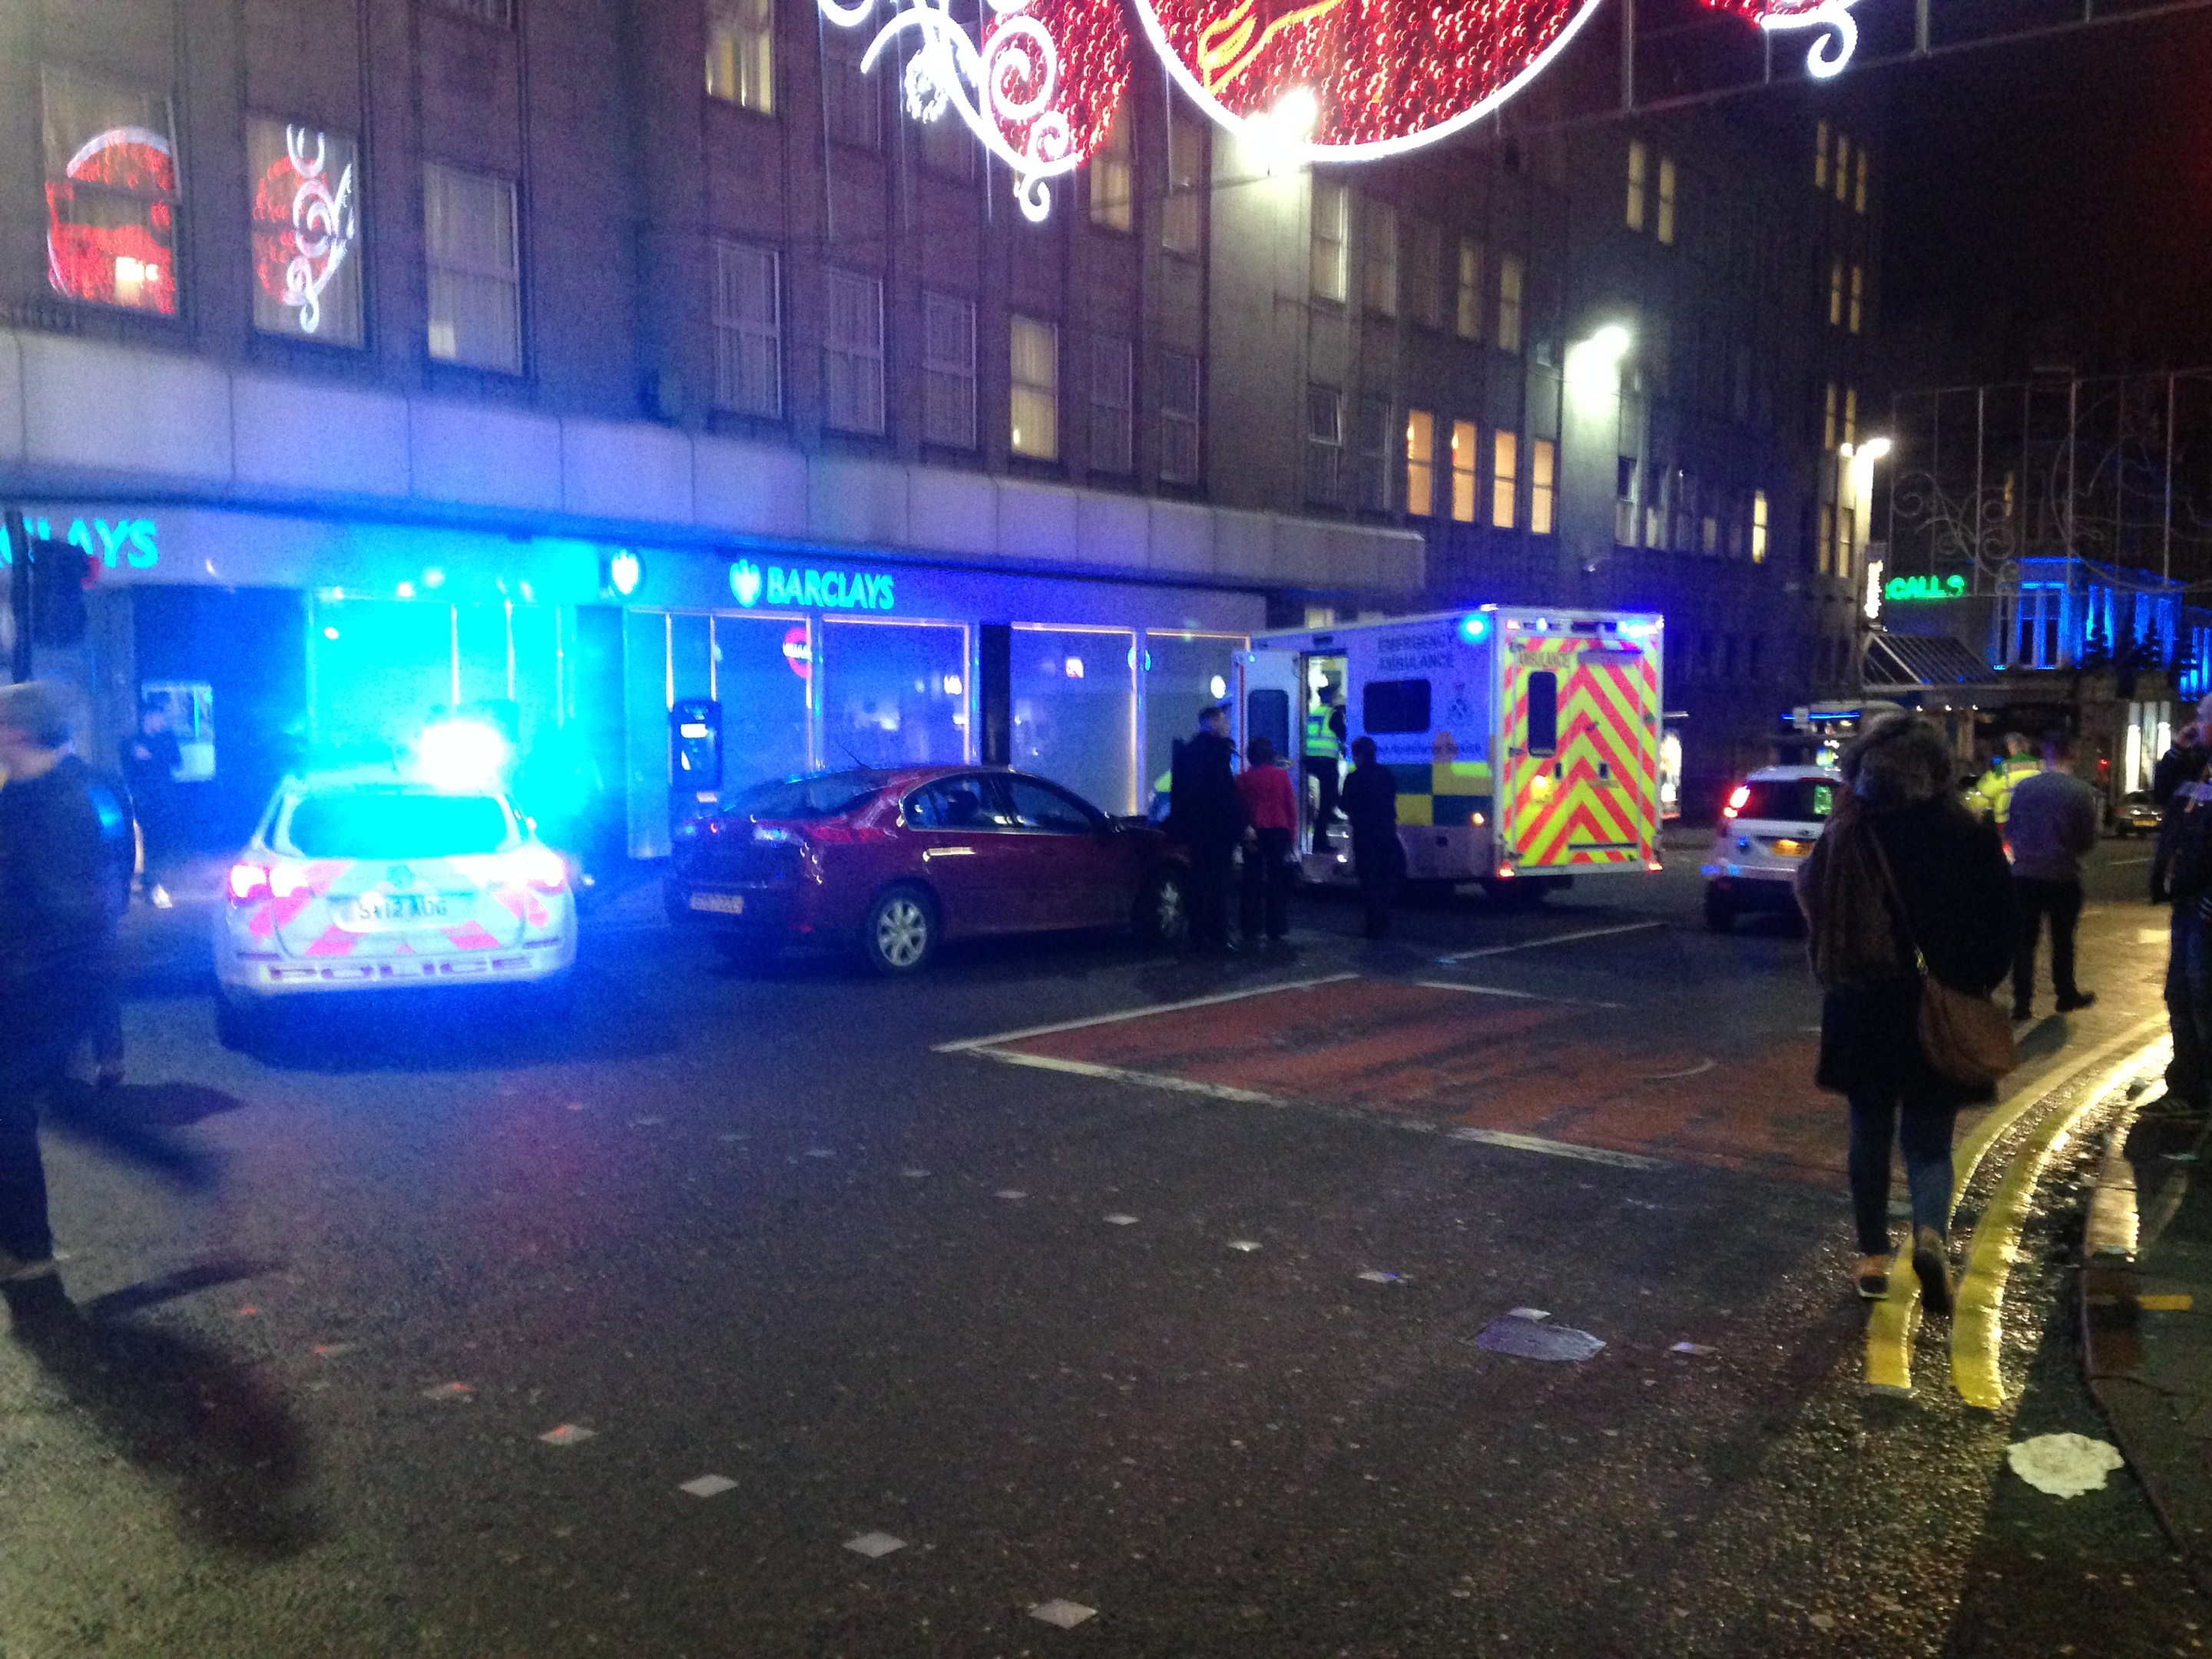 Emergency services are attending to a man who has been struck by a car in Aberdeen city centre